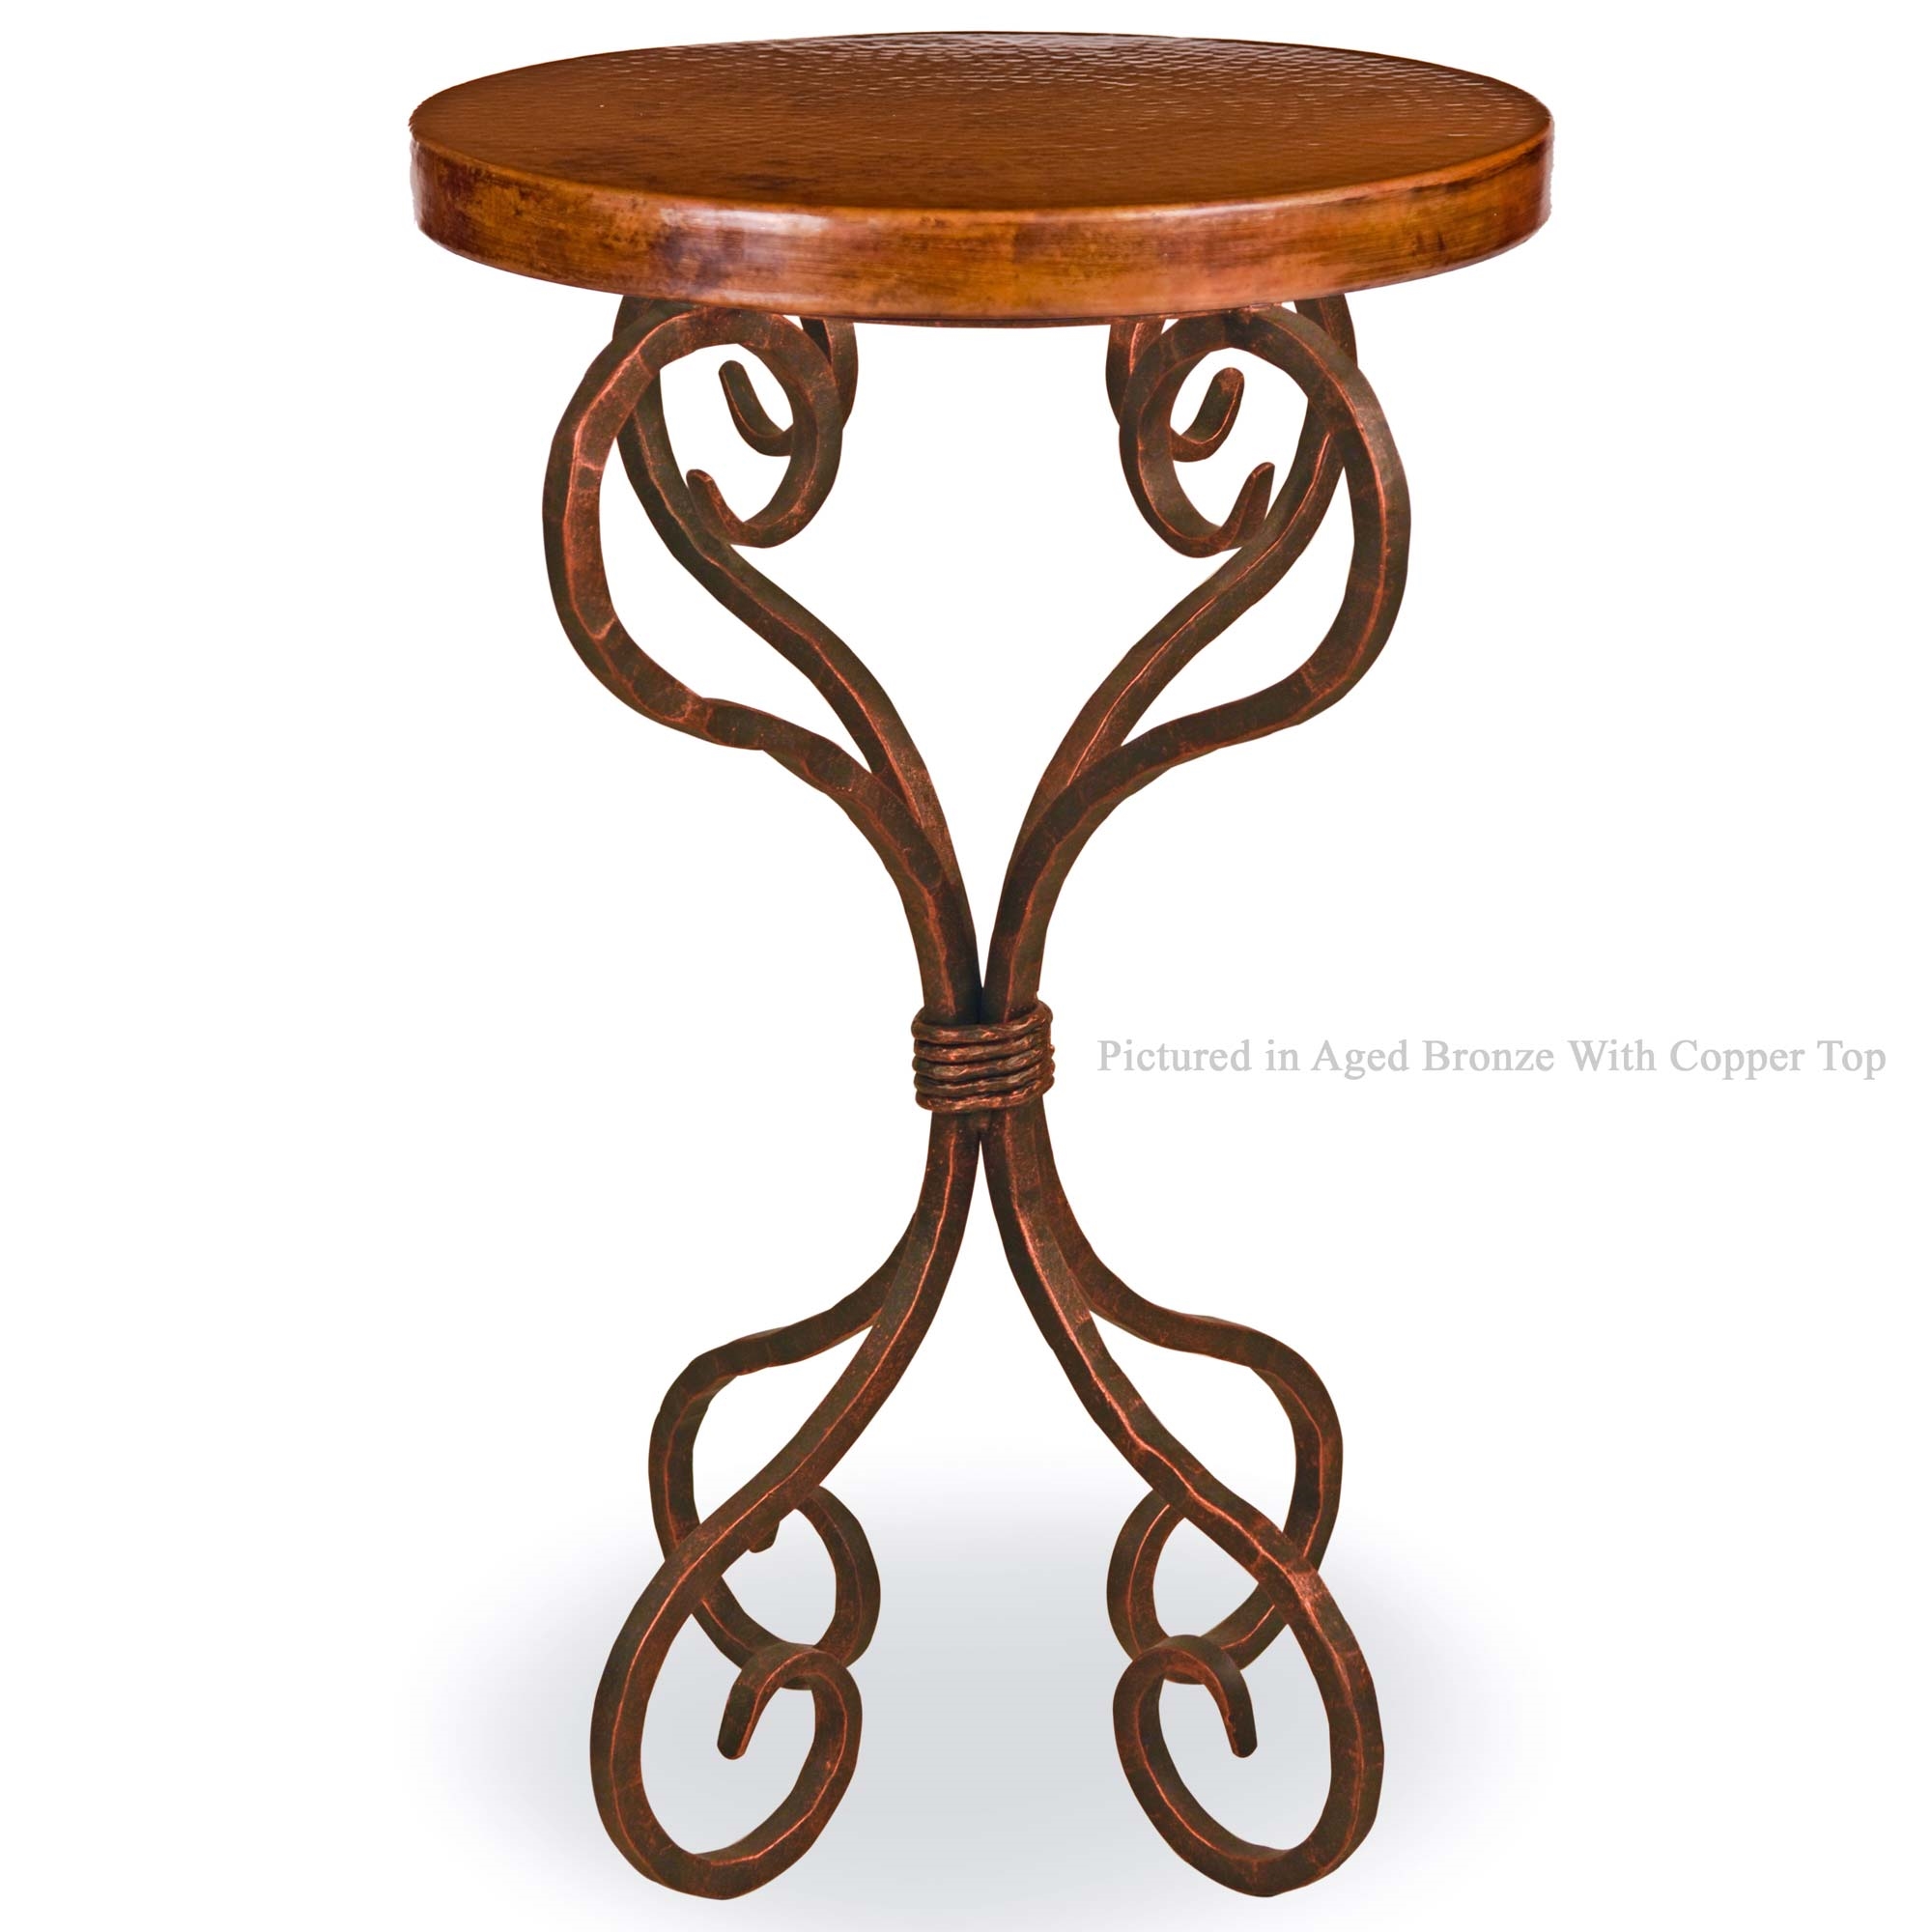 alexander accent table with round copper top mathews twi wrought iron tables glass larger sofa console small metal patio end tall pub set bulk tennis balls plastic garden side